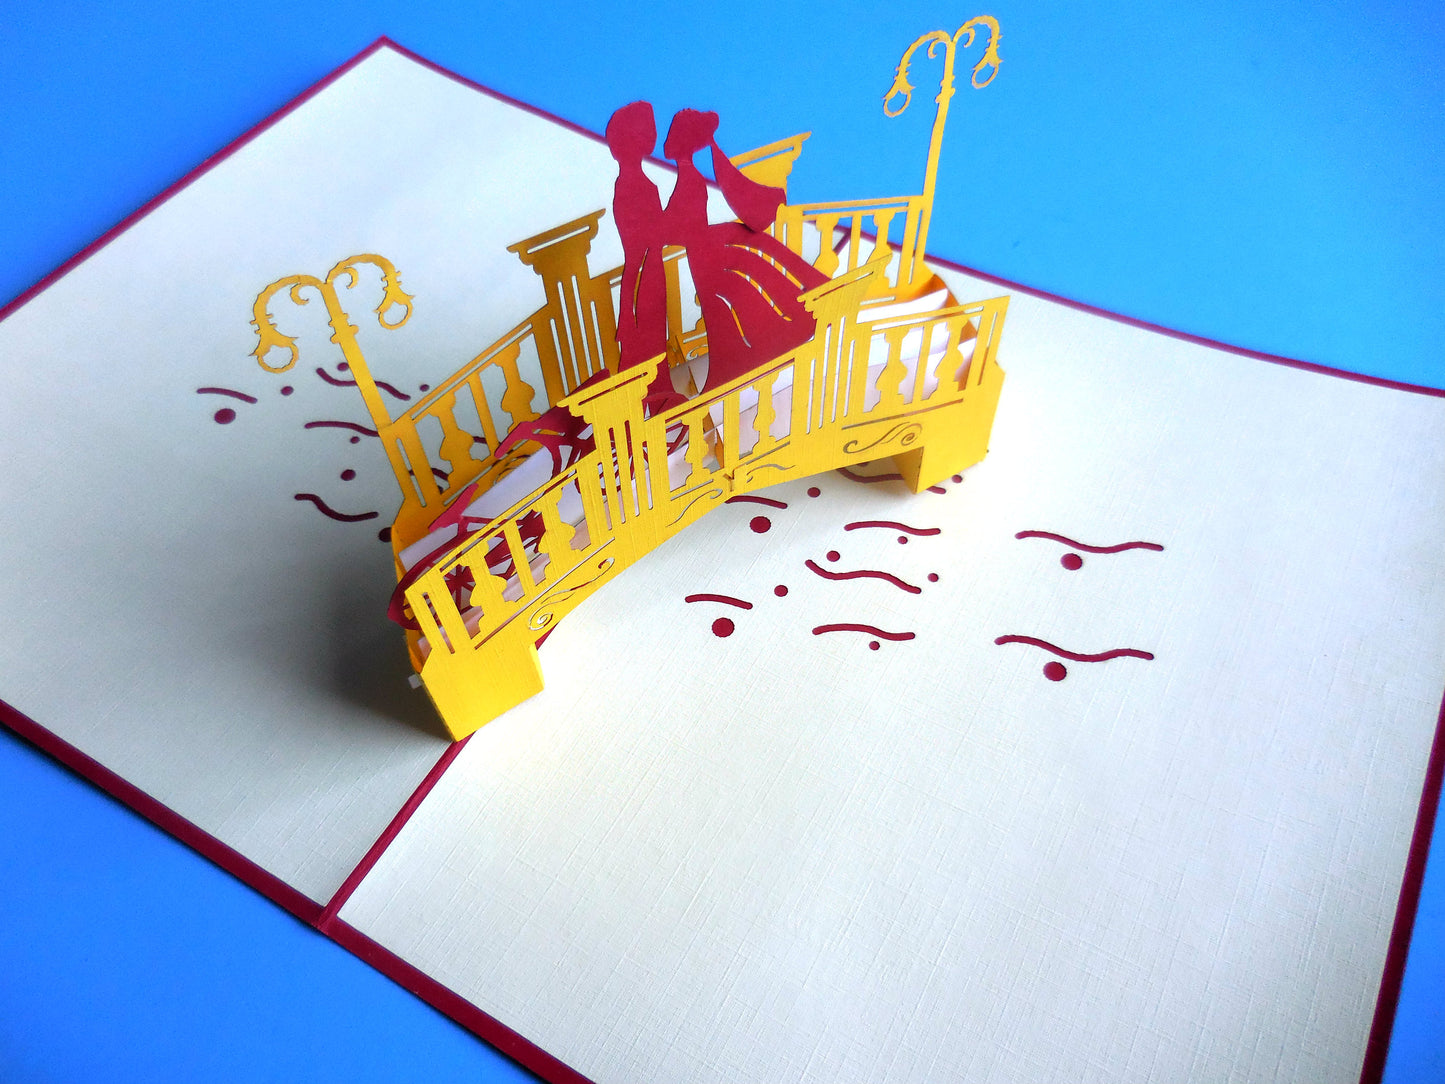 Lovers Bridge 3D Pop Up Greeting Card - Engagement - Just Because - Love - Special Days - iGifts And Cards